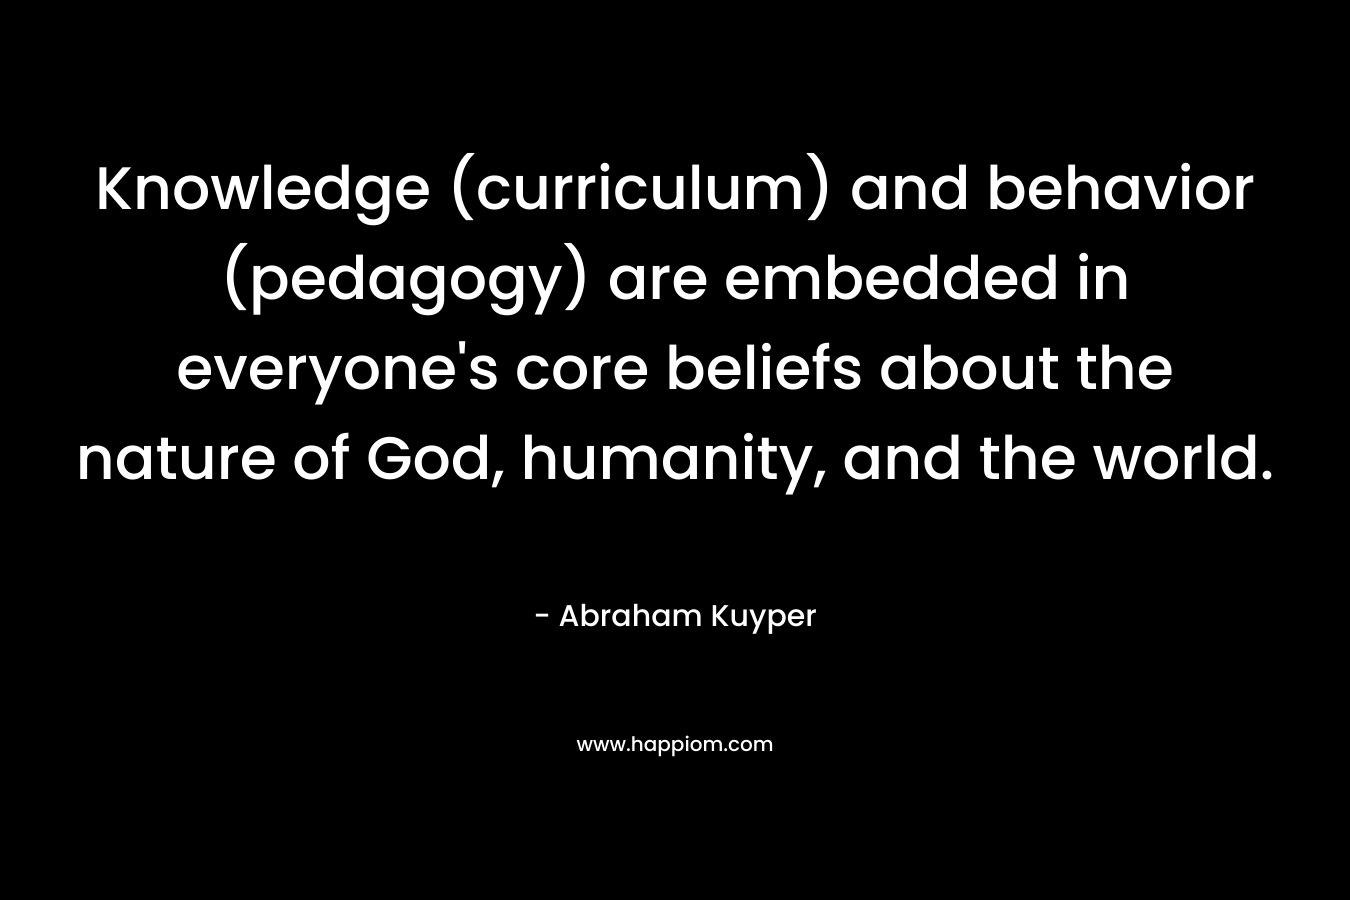 Knowledge (curriculum) and behavior (pedagogy) are embedded in everyone’s core beliefs about the nature of God, humanity, and the world. – Abraham Kuyper